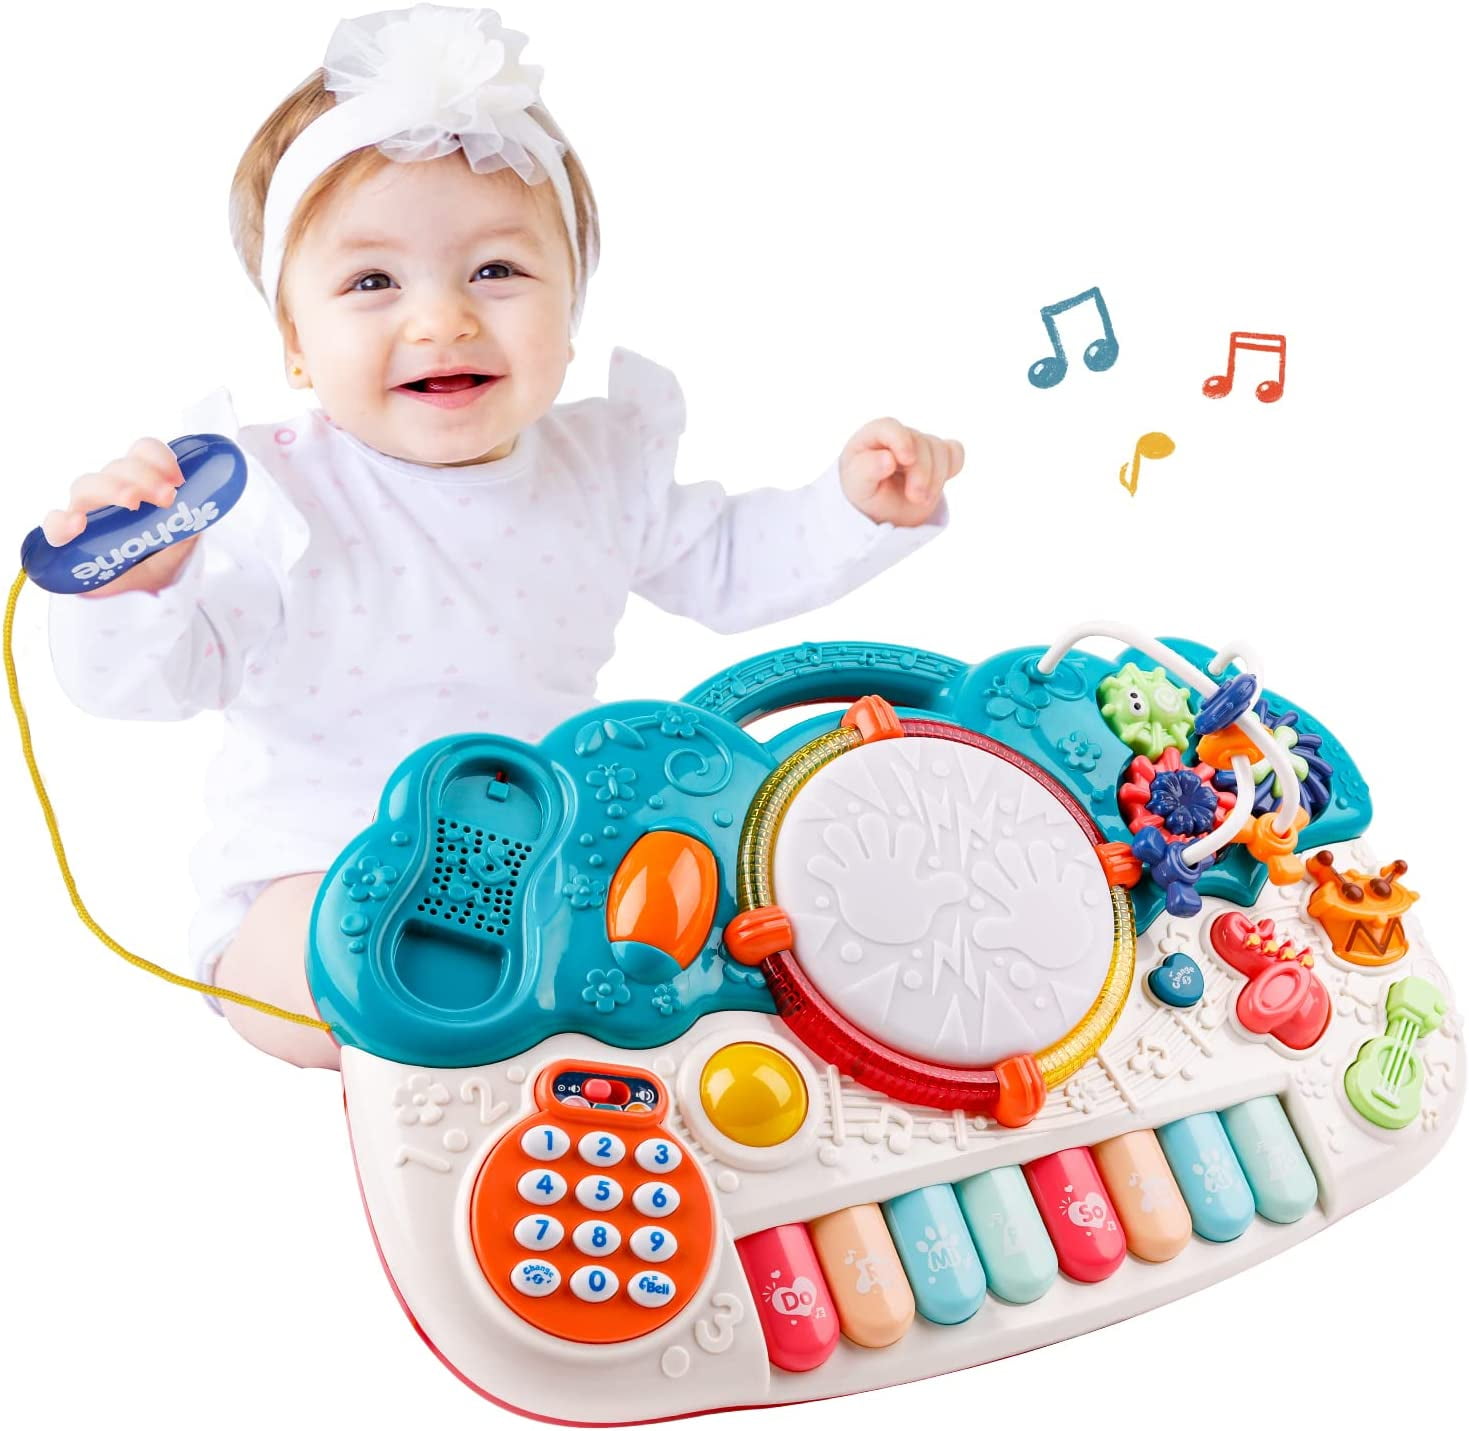 BA-YN901】Children's game table - 0 to 3 years old to accompany the  educational early education music enlightenment multi-functional game  storage table table legs detachable B music rattle bed bell buybuy@TOYS